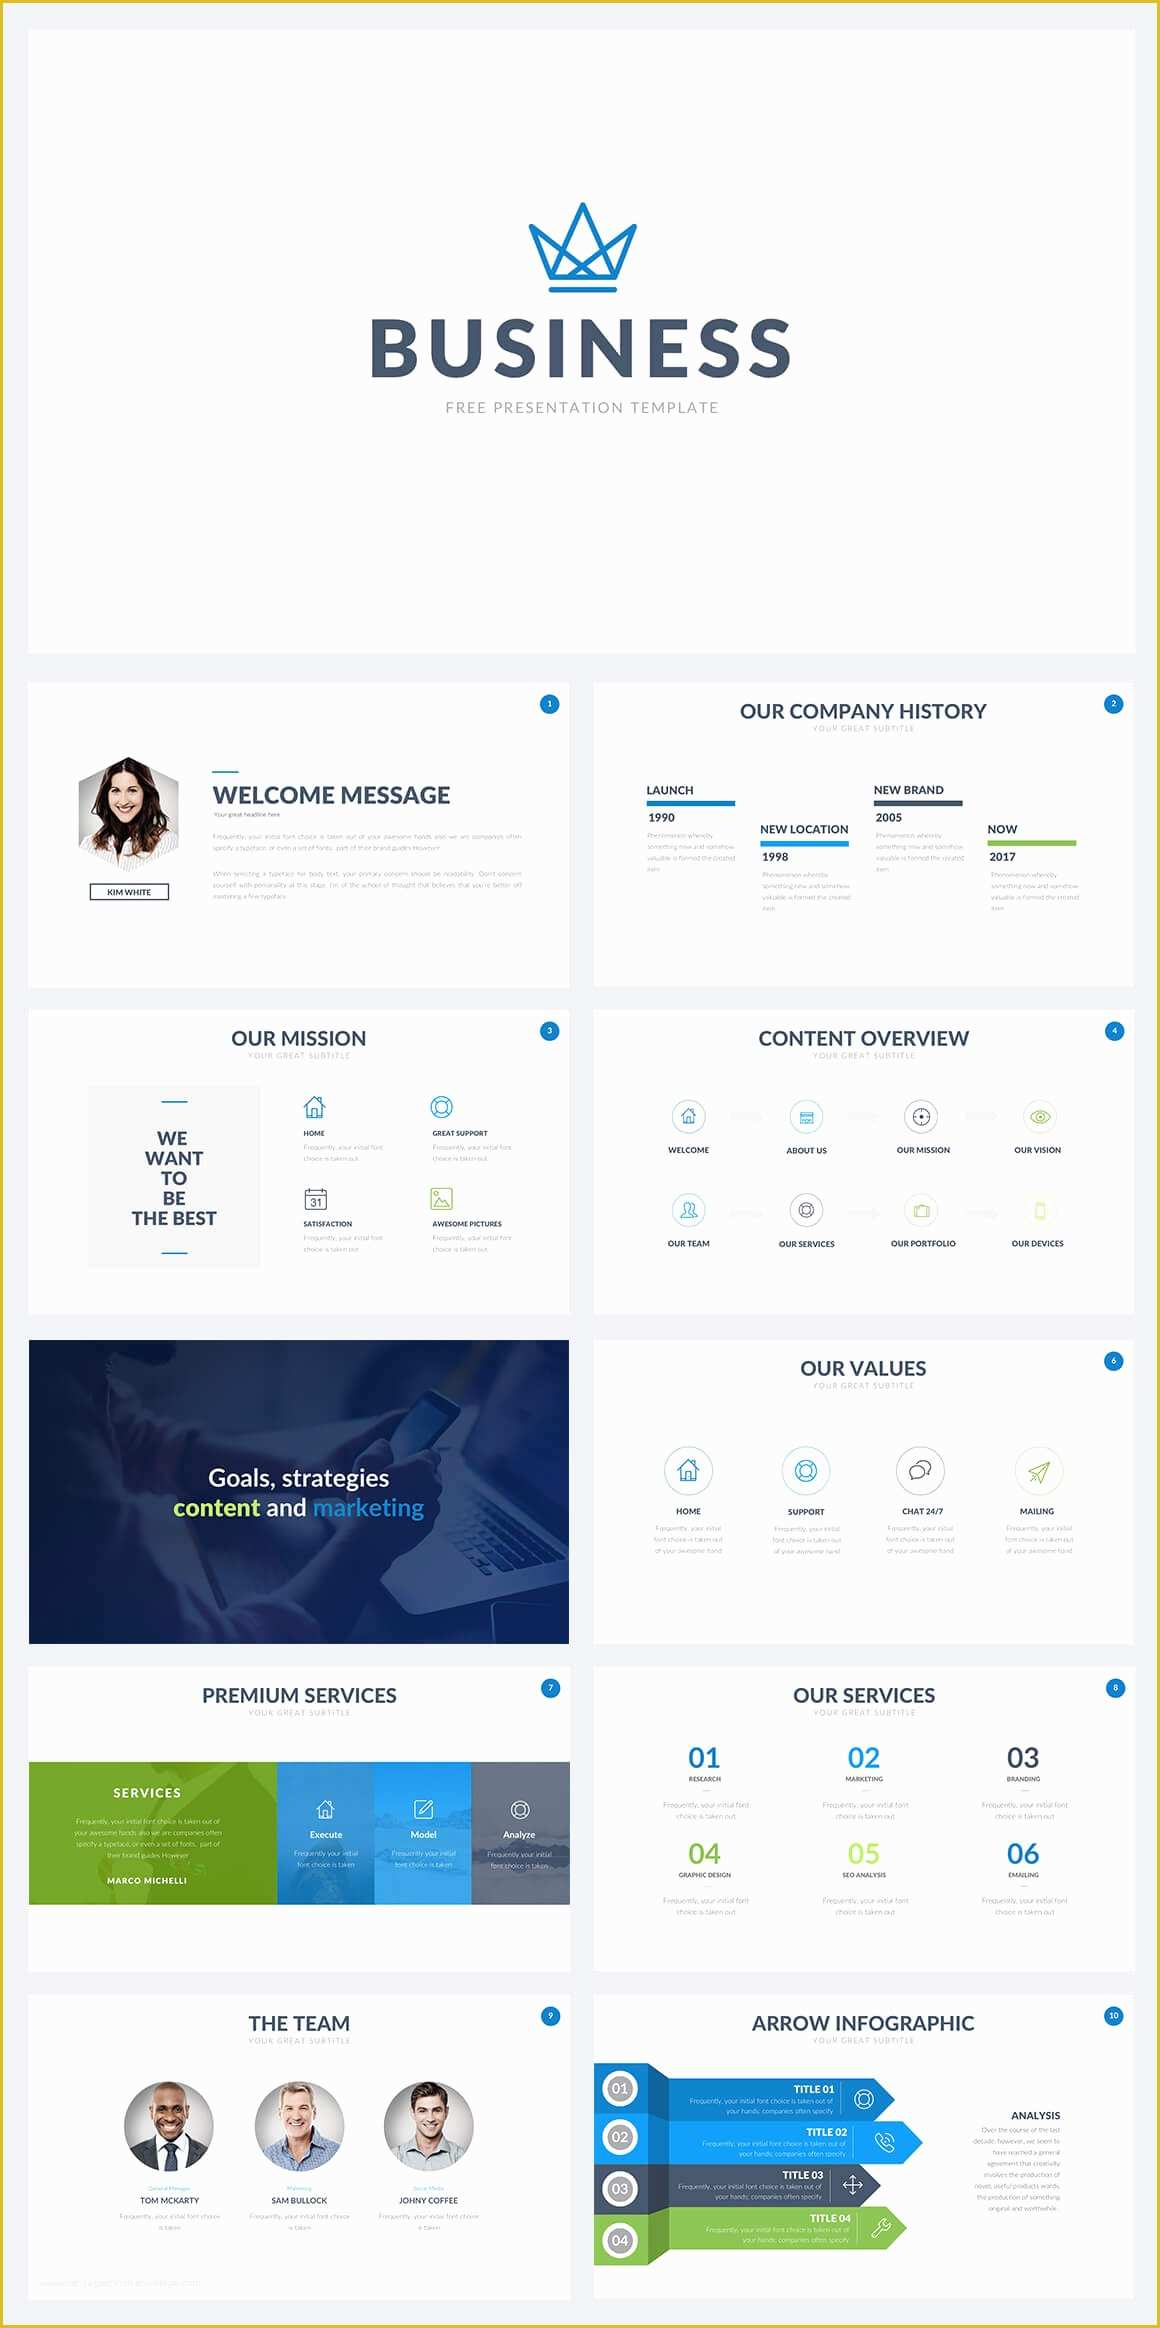 Free Business Powerpoint Templates 2017 Of 50 Best Free Cool Powerpoint Templates Of 2018 Updated